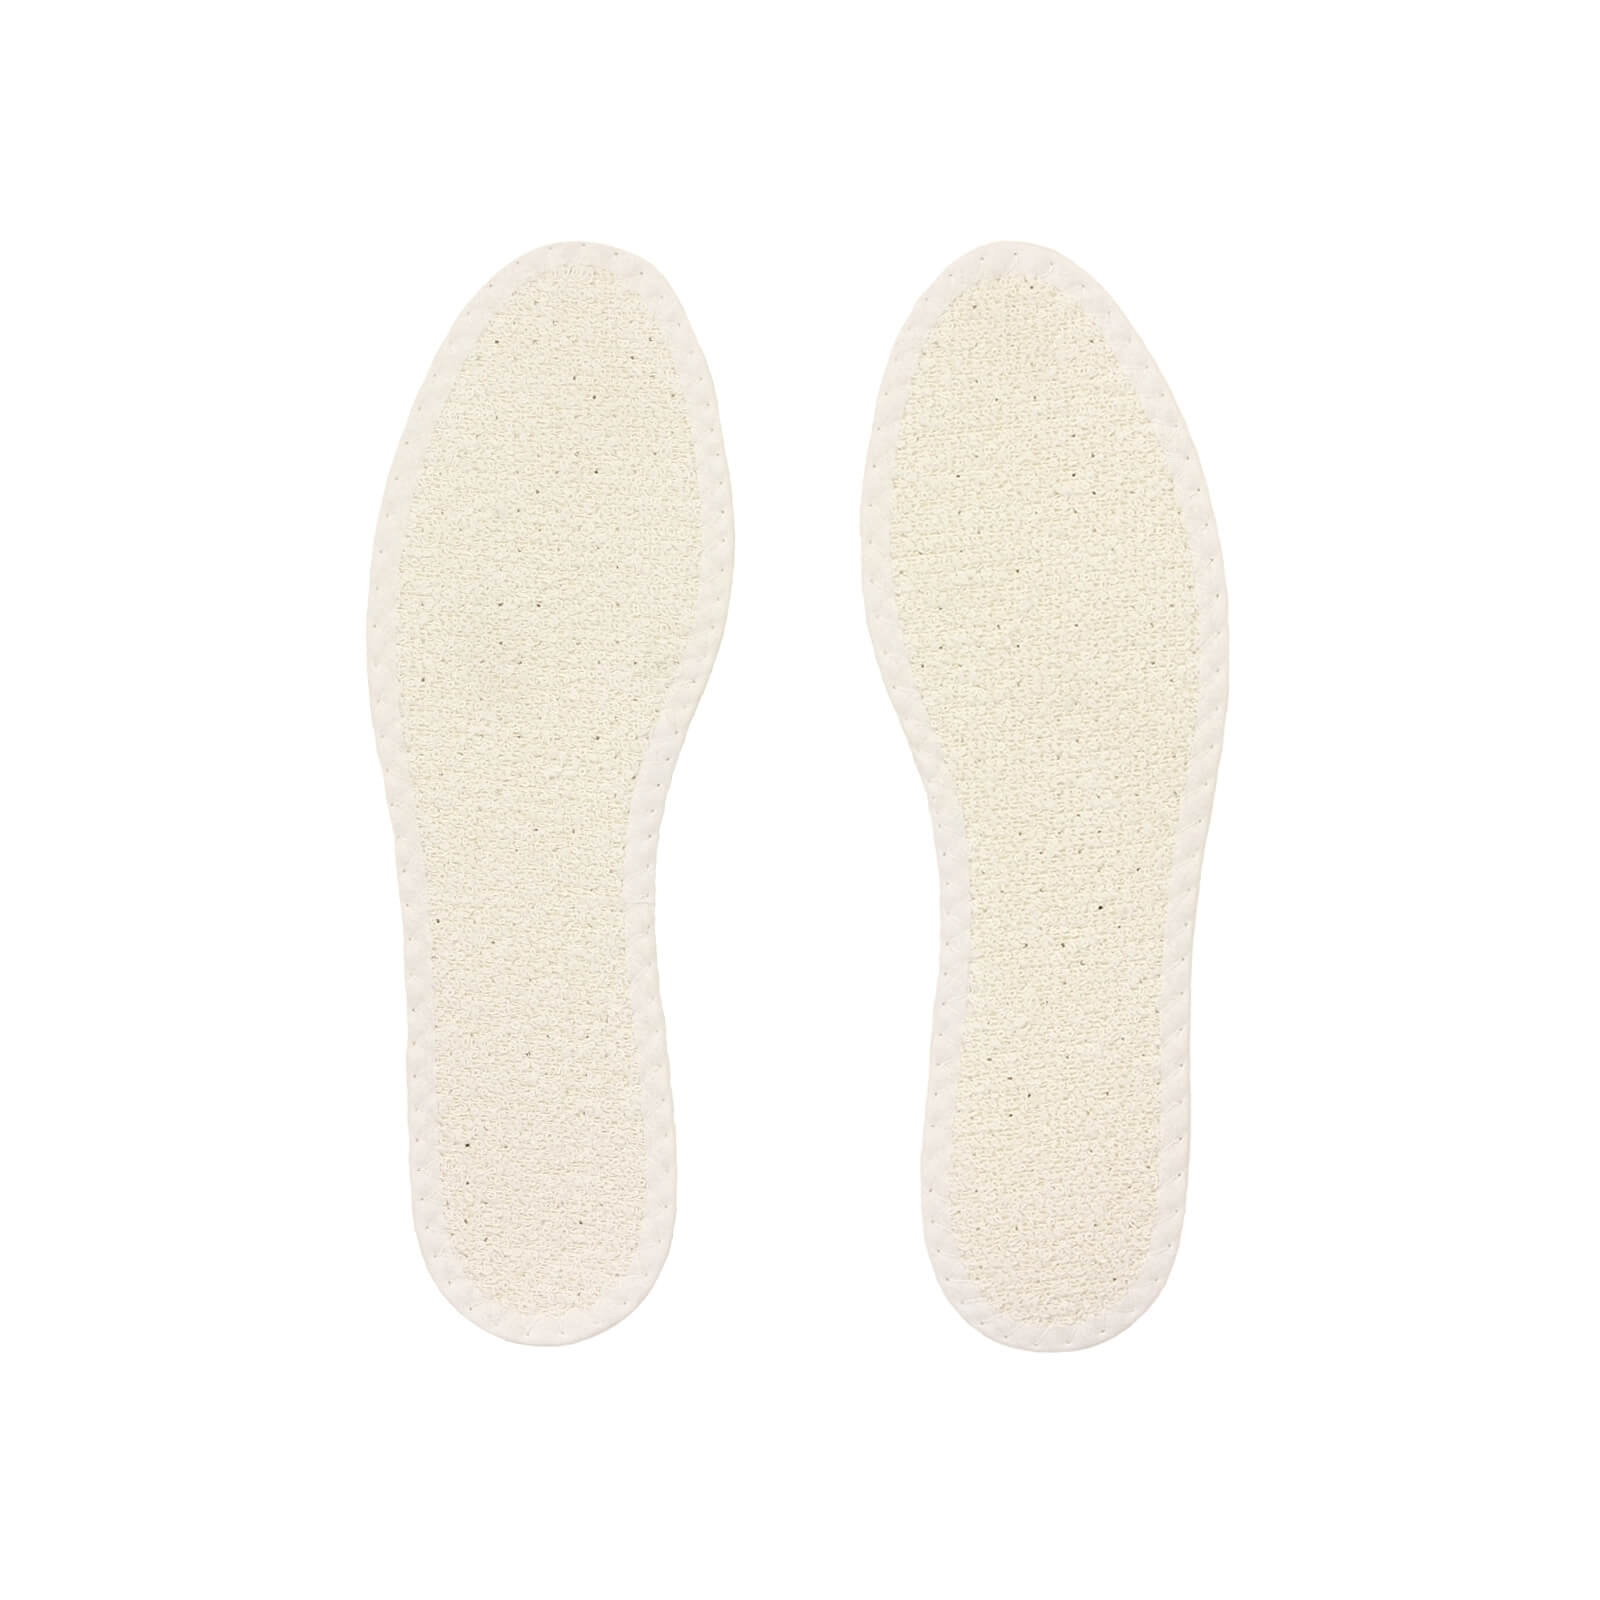 Barefoot Insole with an Outer Toweling to keep your feet dry